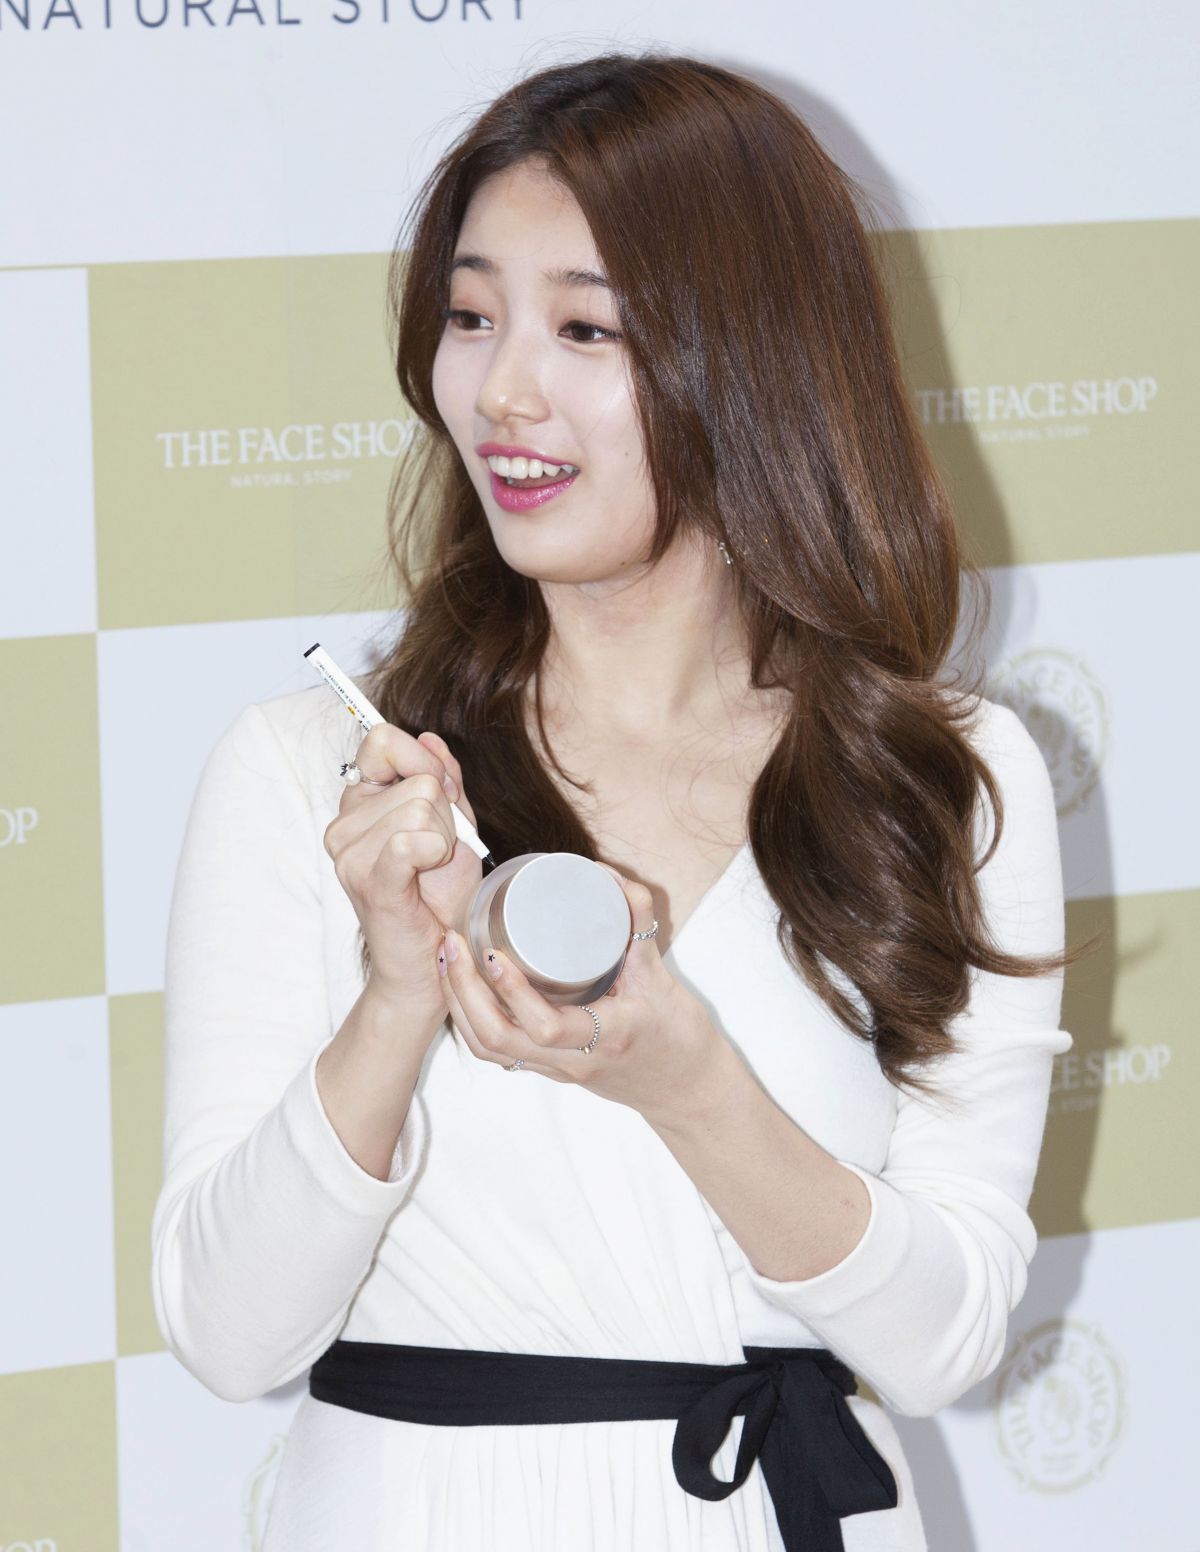 BAE SUZY at The Face Shop Store Photocall in Seoul 09/19/2015 – HawtCelebs